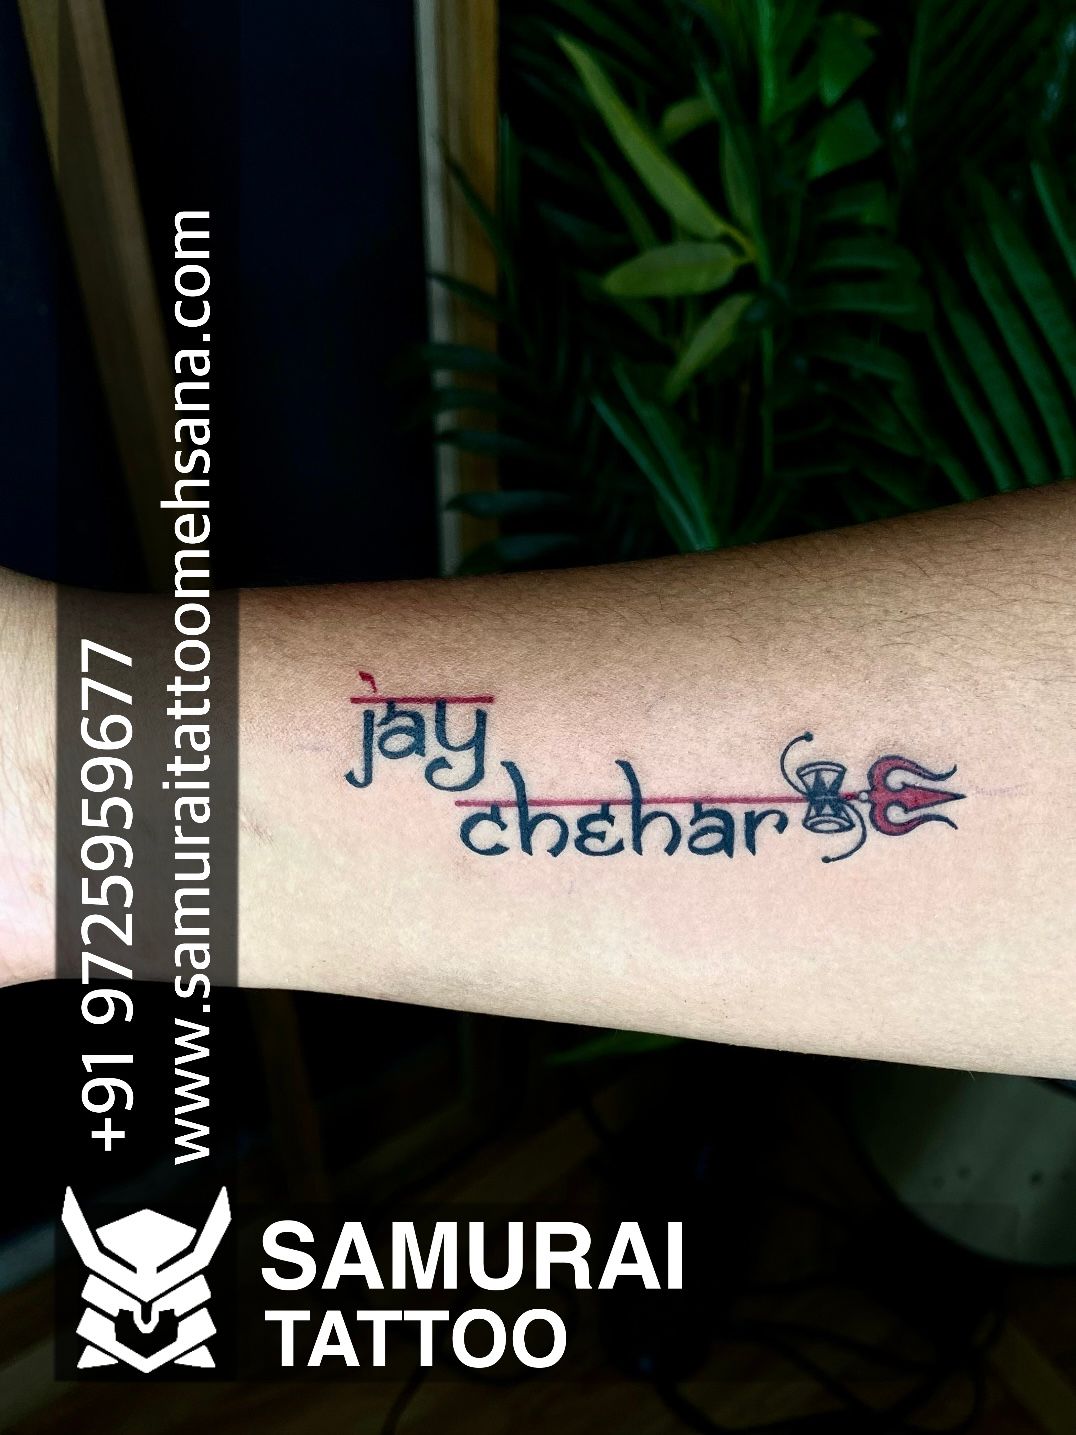 Name Tattoo On Hand  Instagram